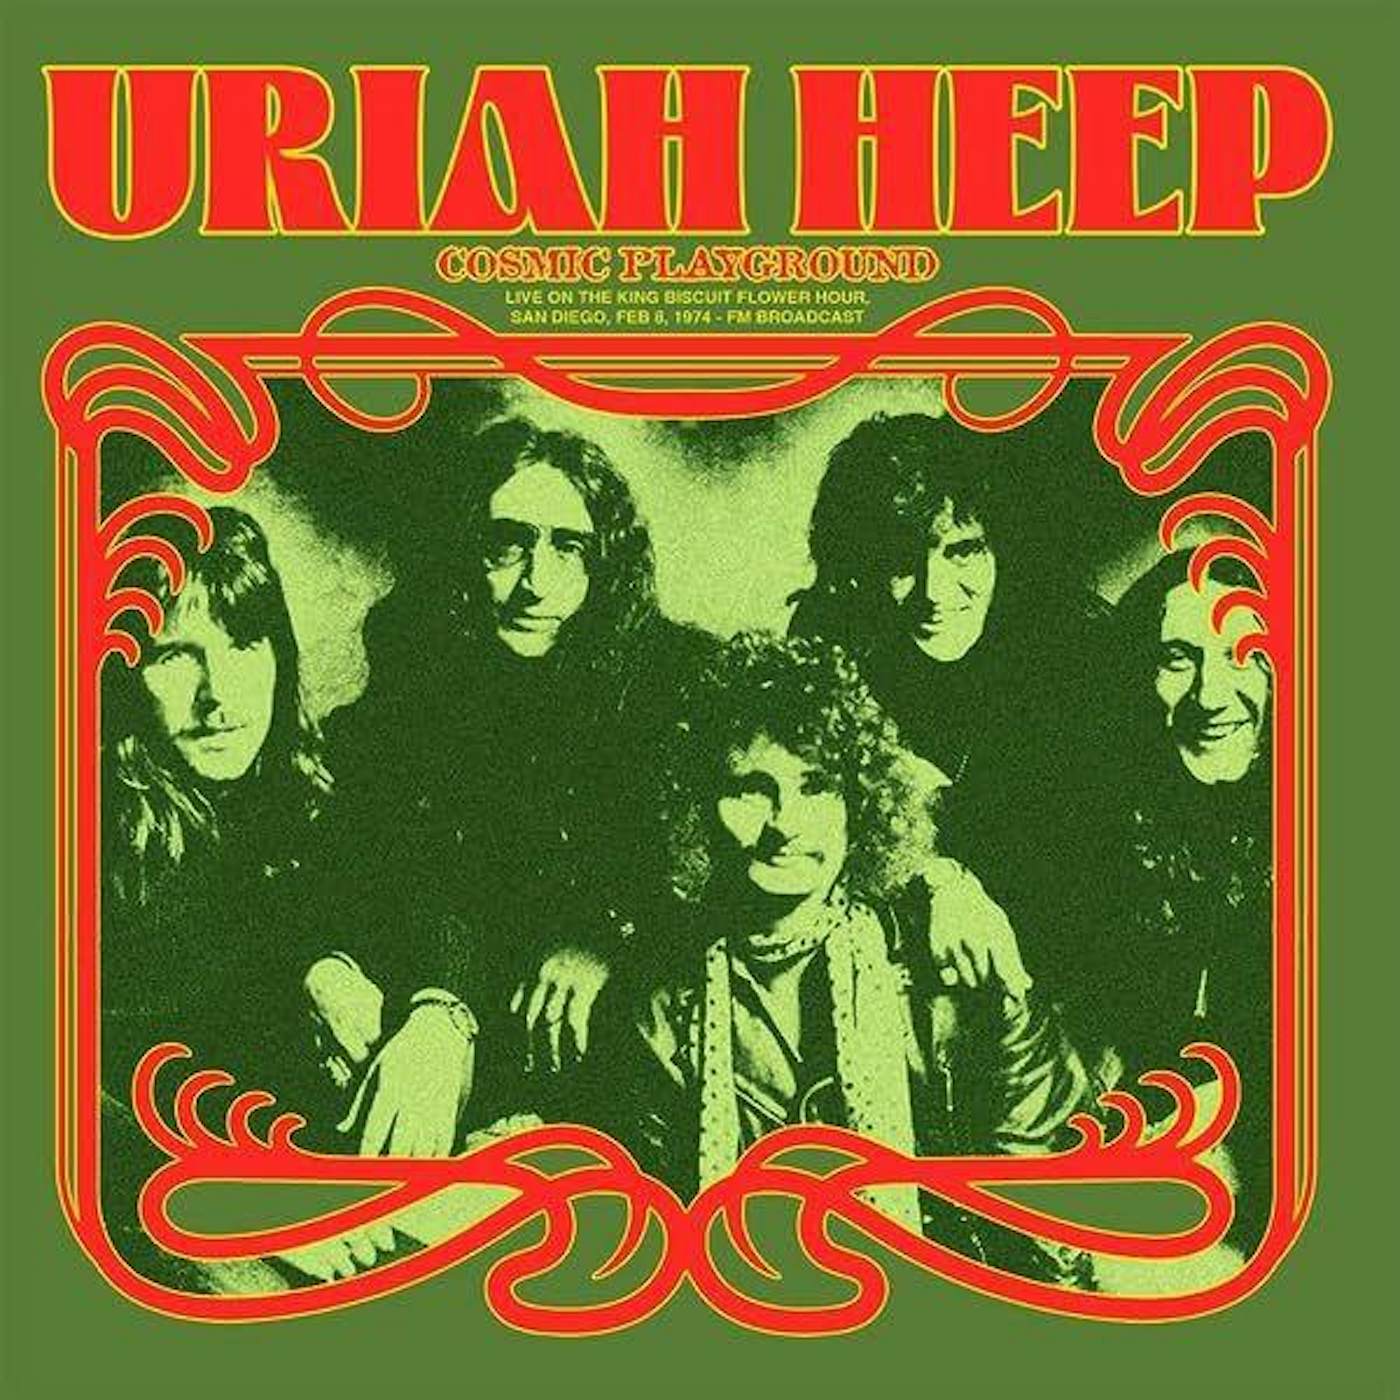 Uriah Heep Cosmic Playground: Live On The King Biscuit Flower Hour, San Diego, Feb 8, 1974 (Green) Vinyl Record